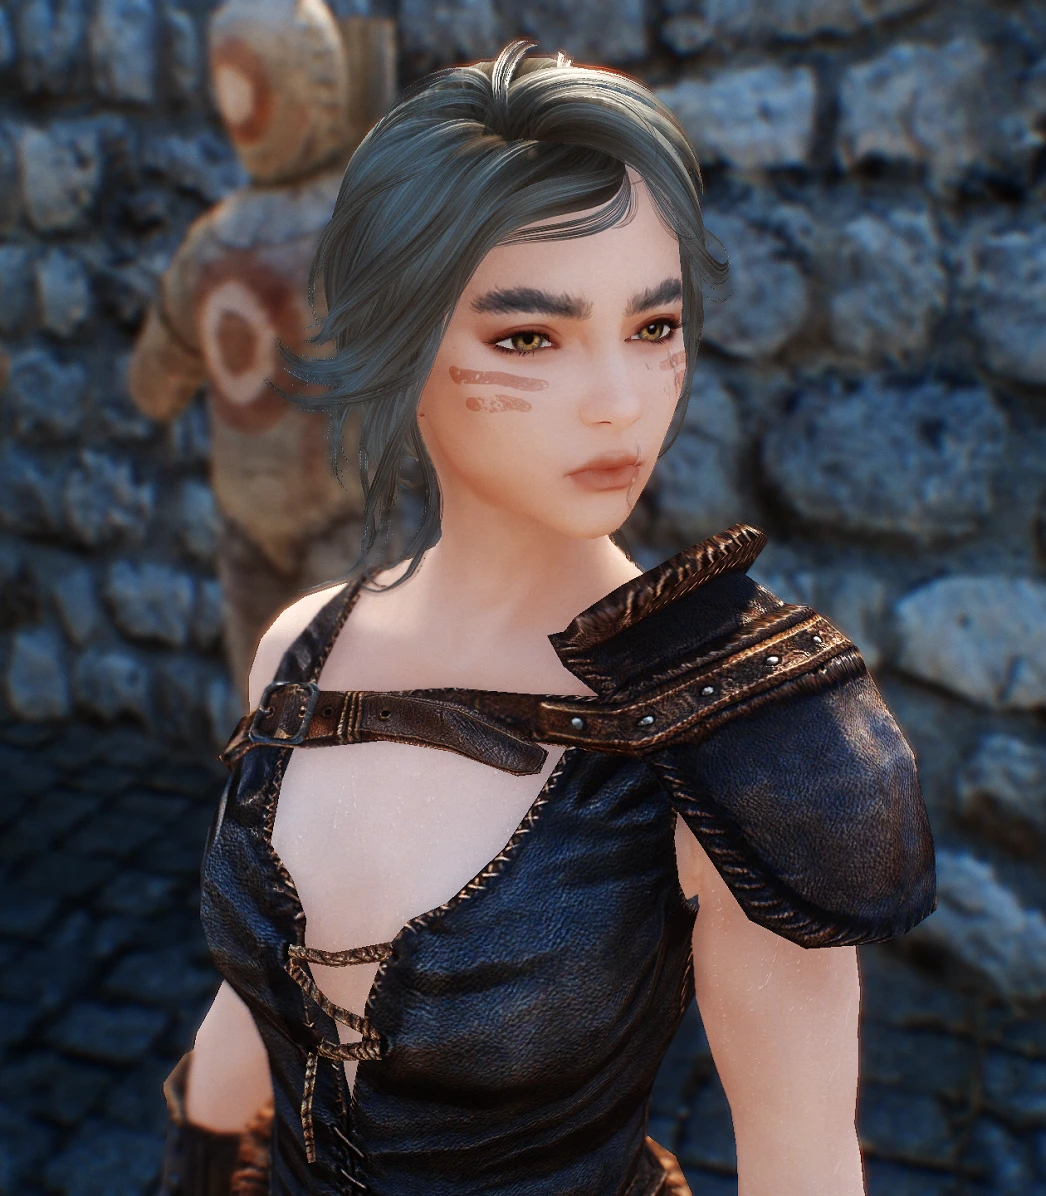 Females Of The Companions At Skyrim Special Edition Nexus Mods And